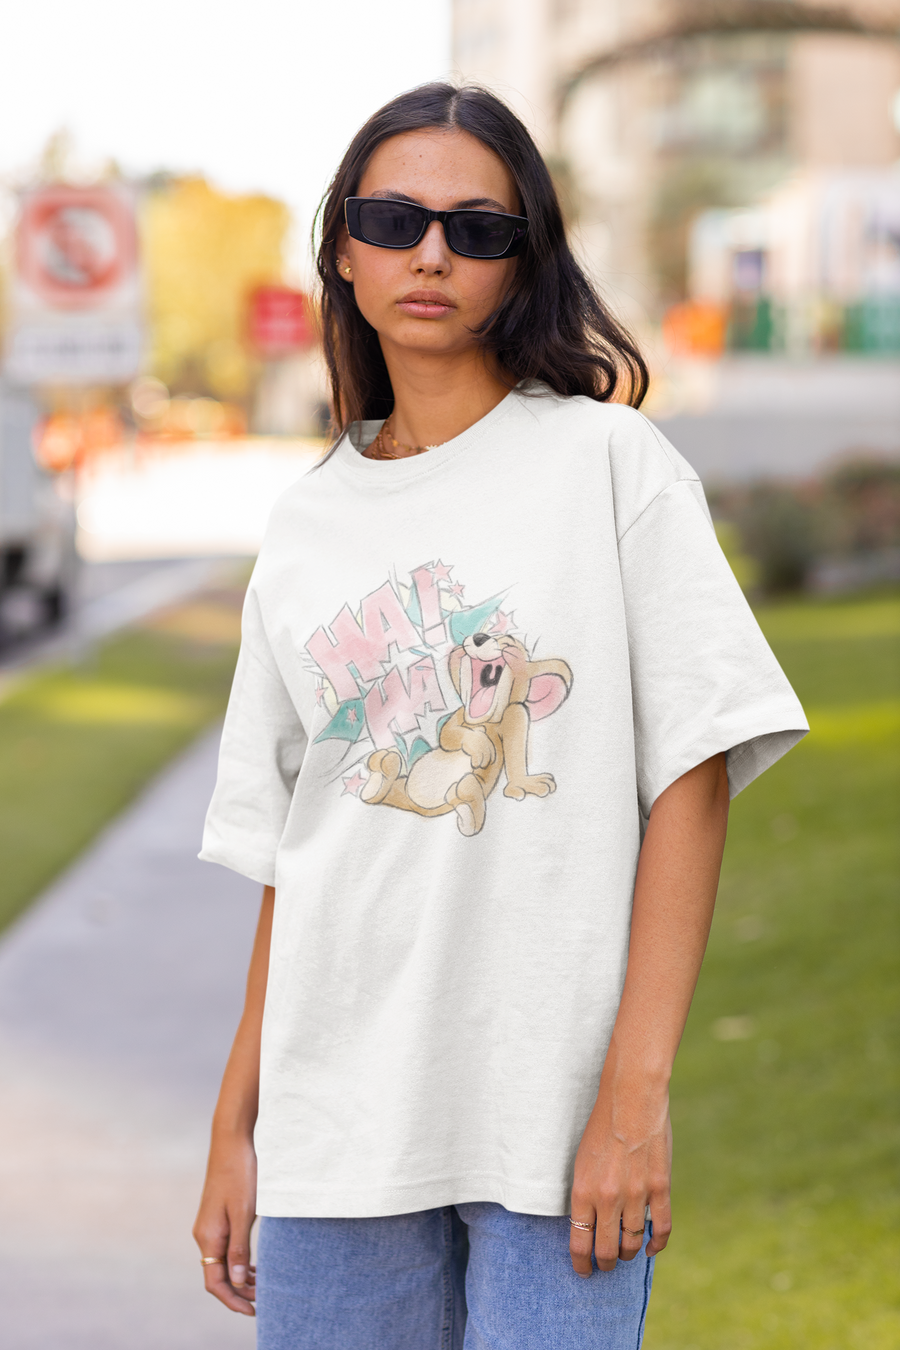 Official Tom & Jerry - Jerry Laughing Oversized T-Shirt